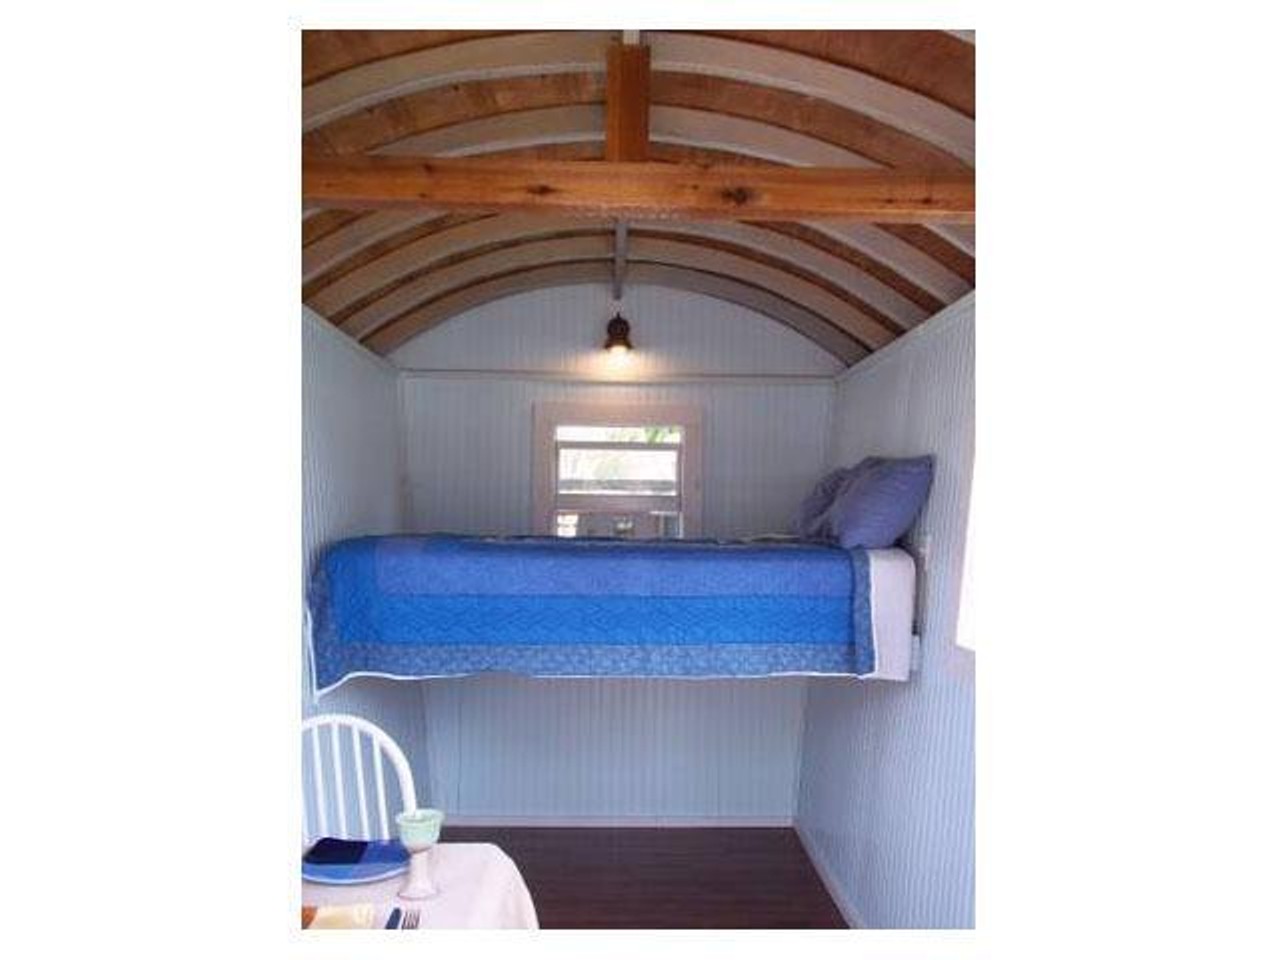 Ocean-themed Gypsy Wagon
Location: Englewood
Price: $8000
Size: 98 sq ft
So much room for activities!